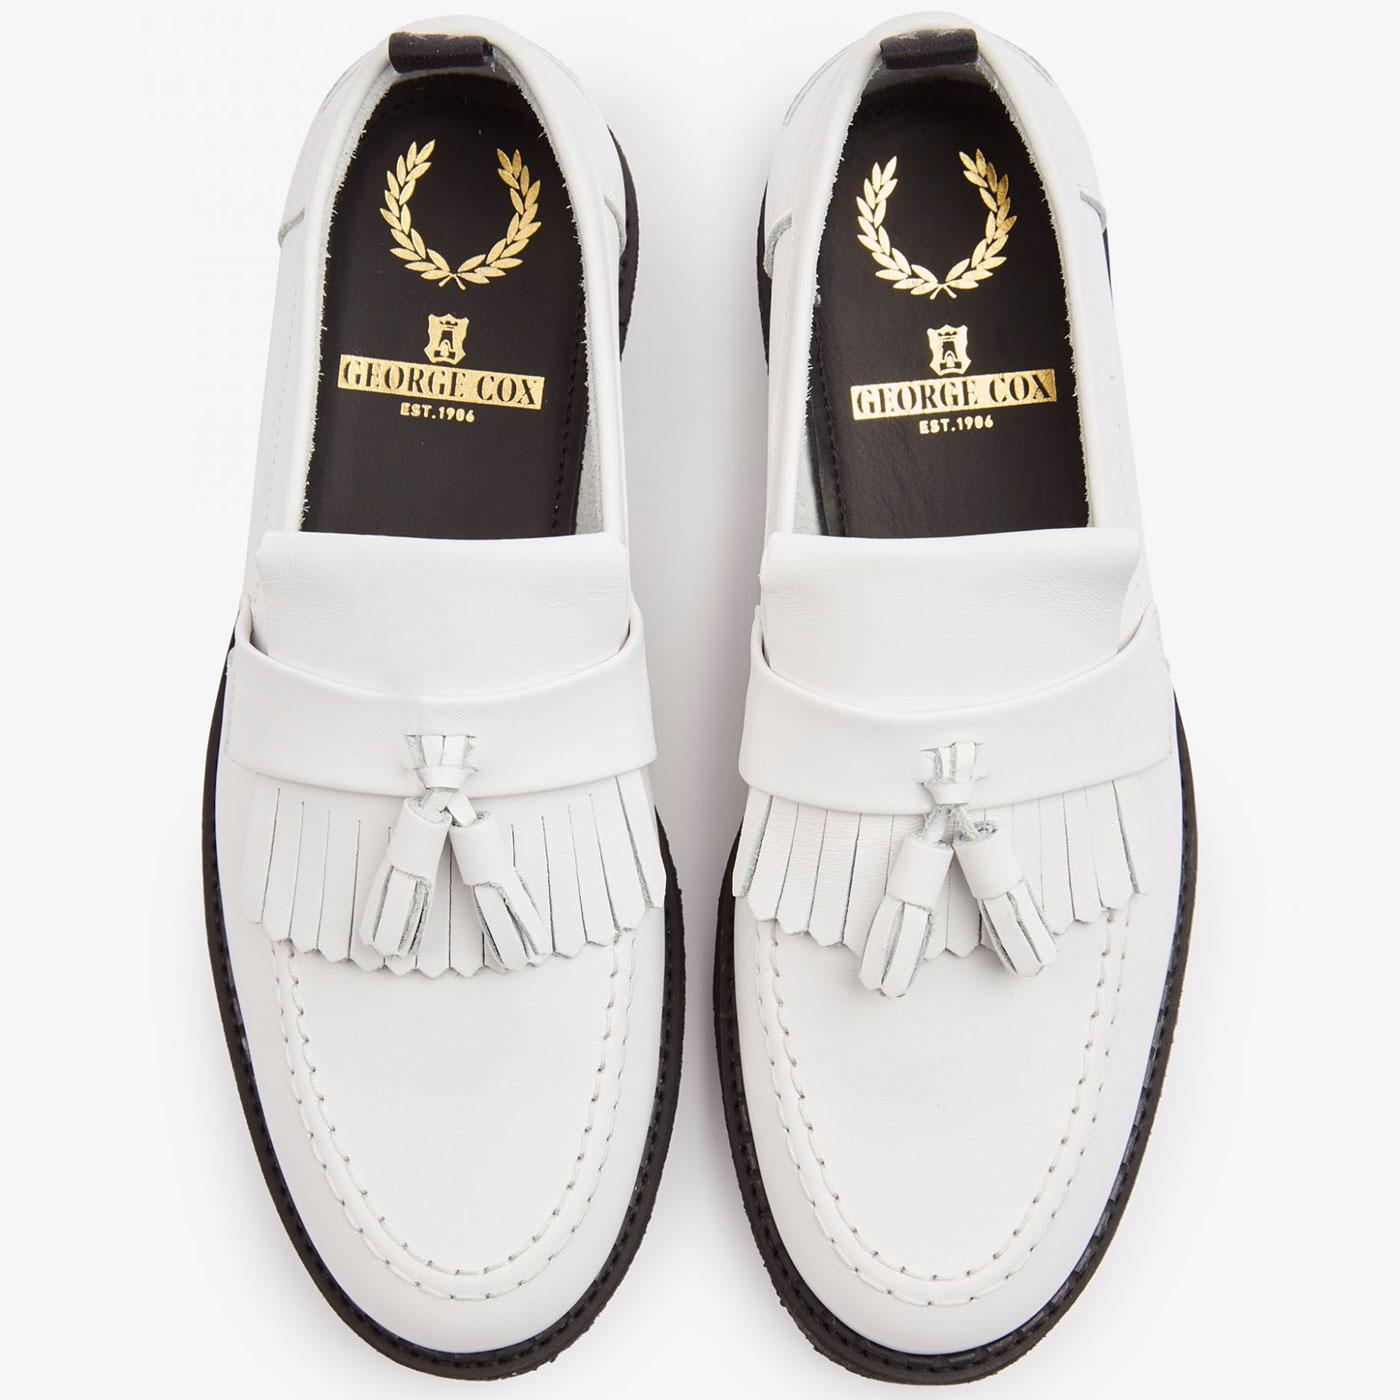 FRED PERRY x GEORGE COX Men's Mod Tassel Loafers W